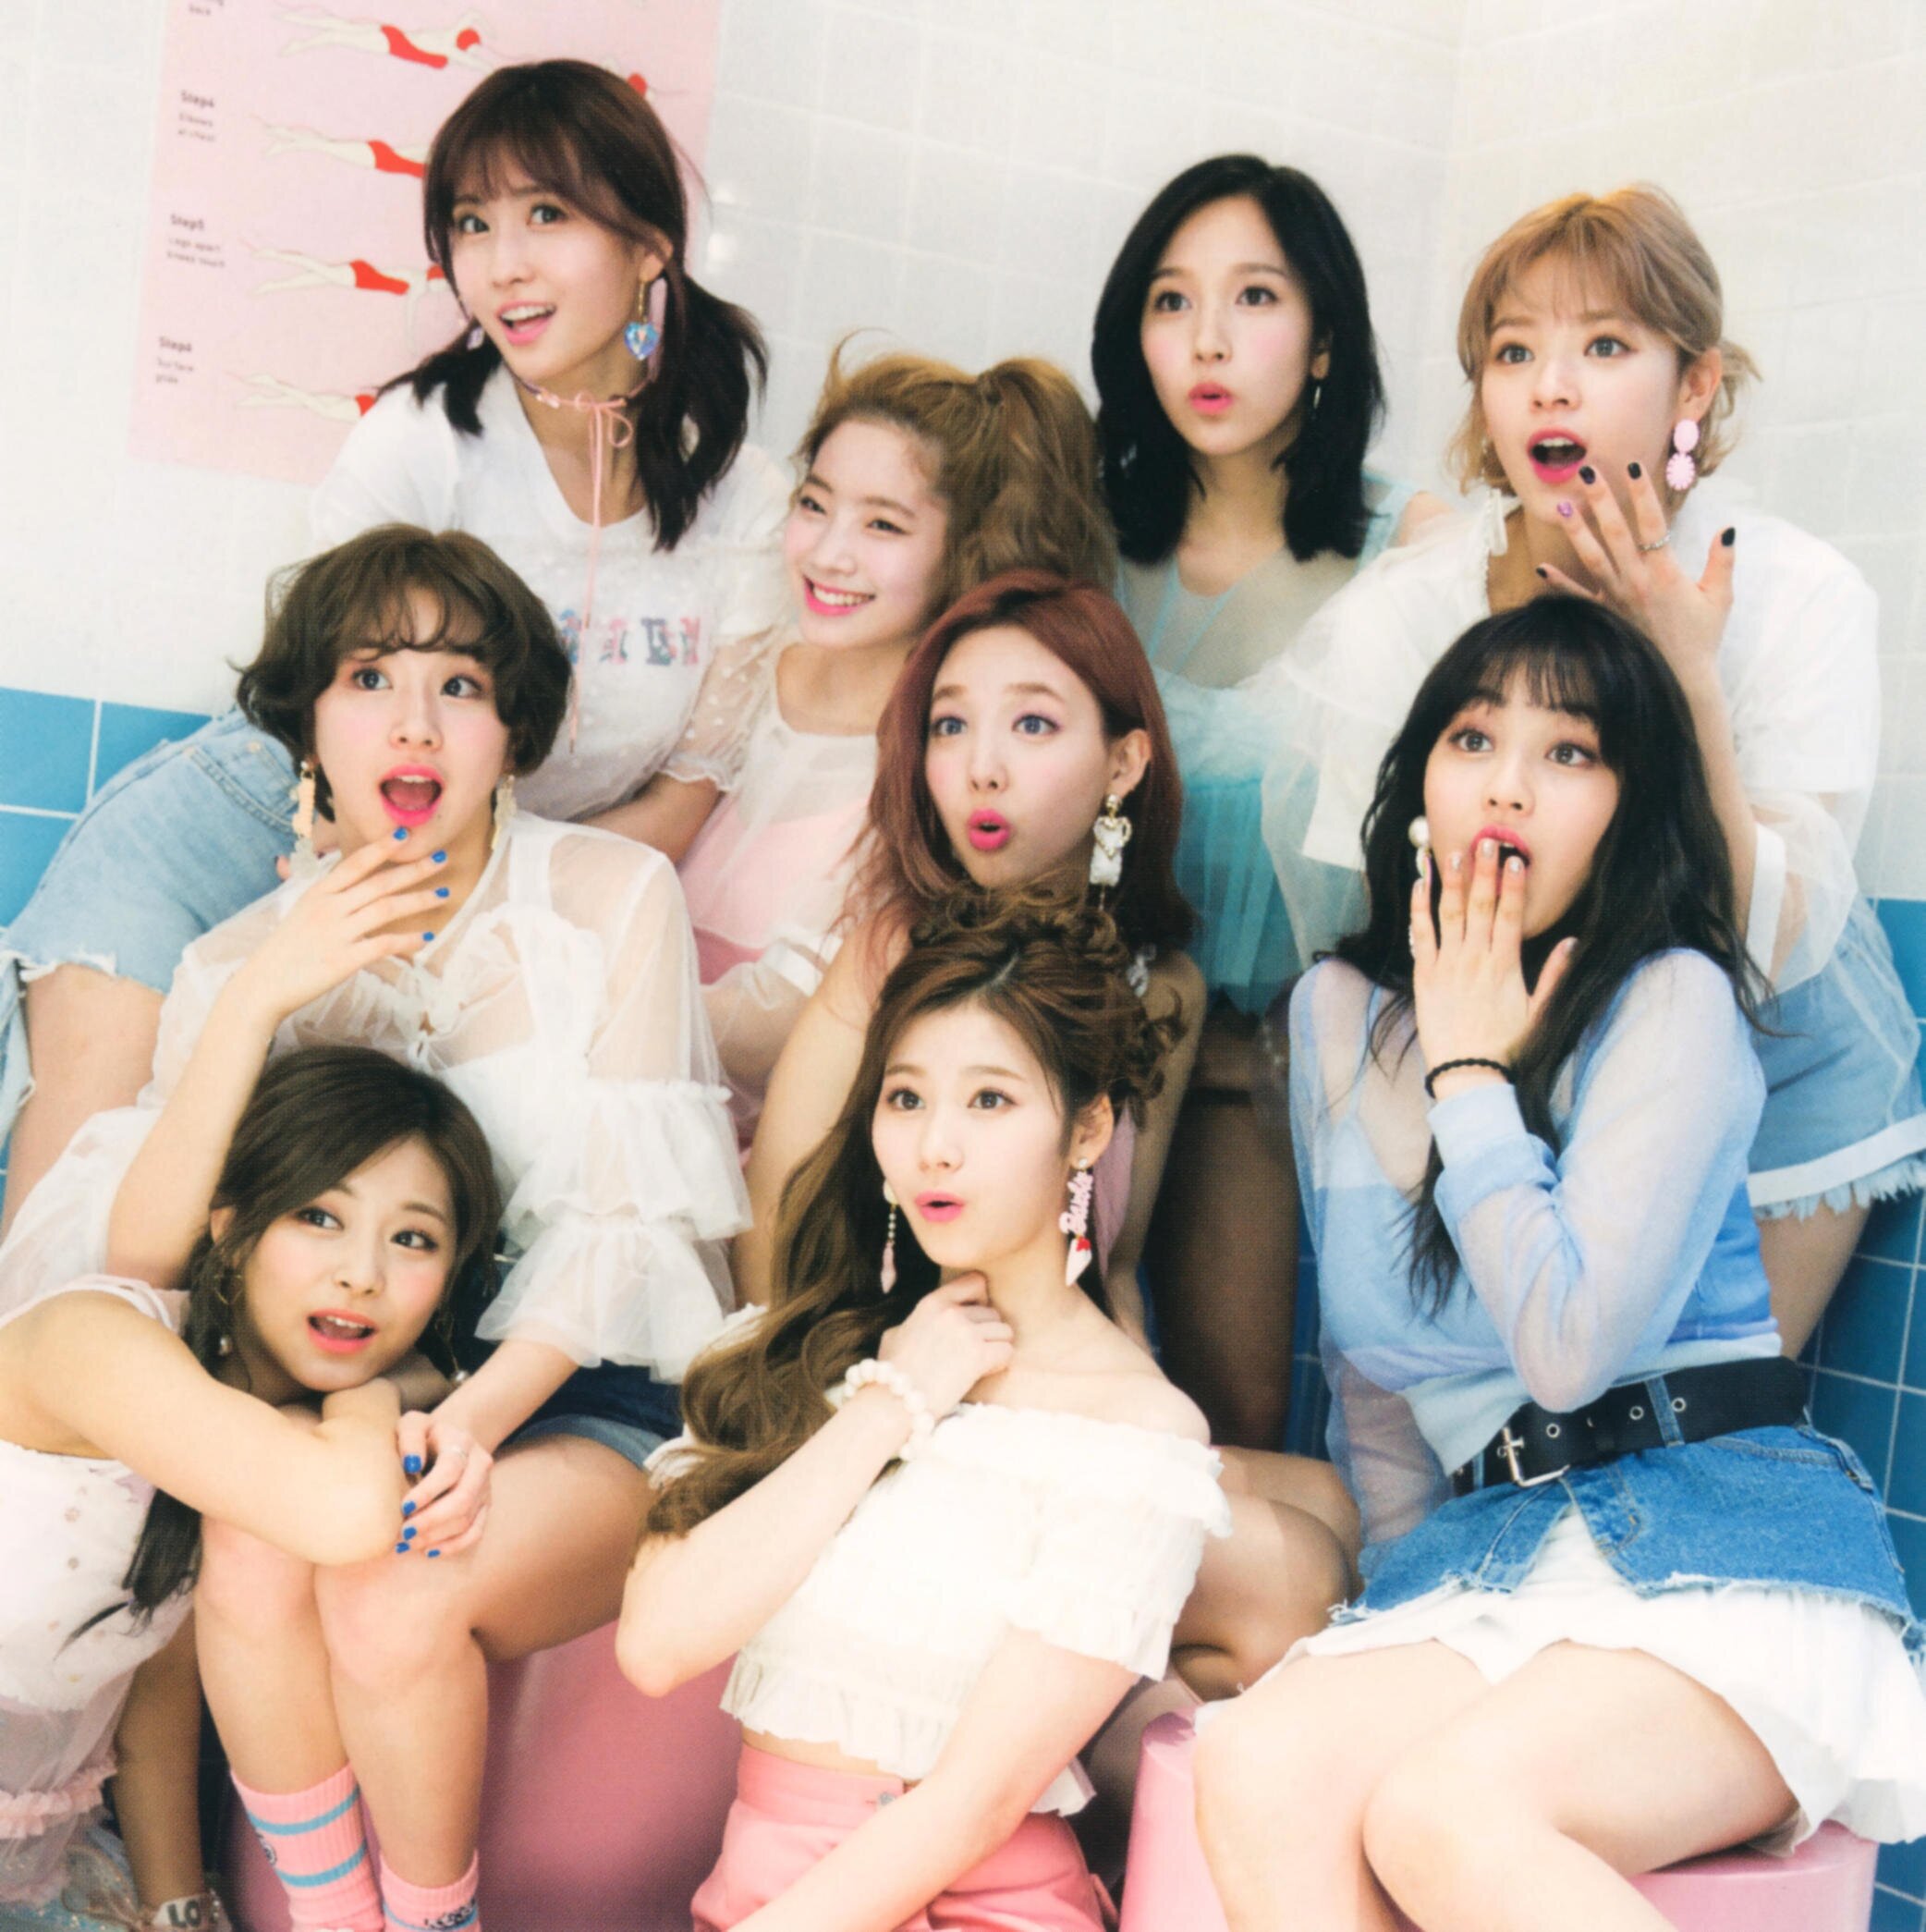 Pink, white, and blue group photo of TWICE during Signal era